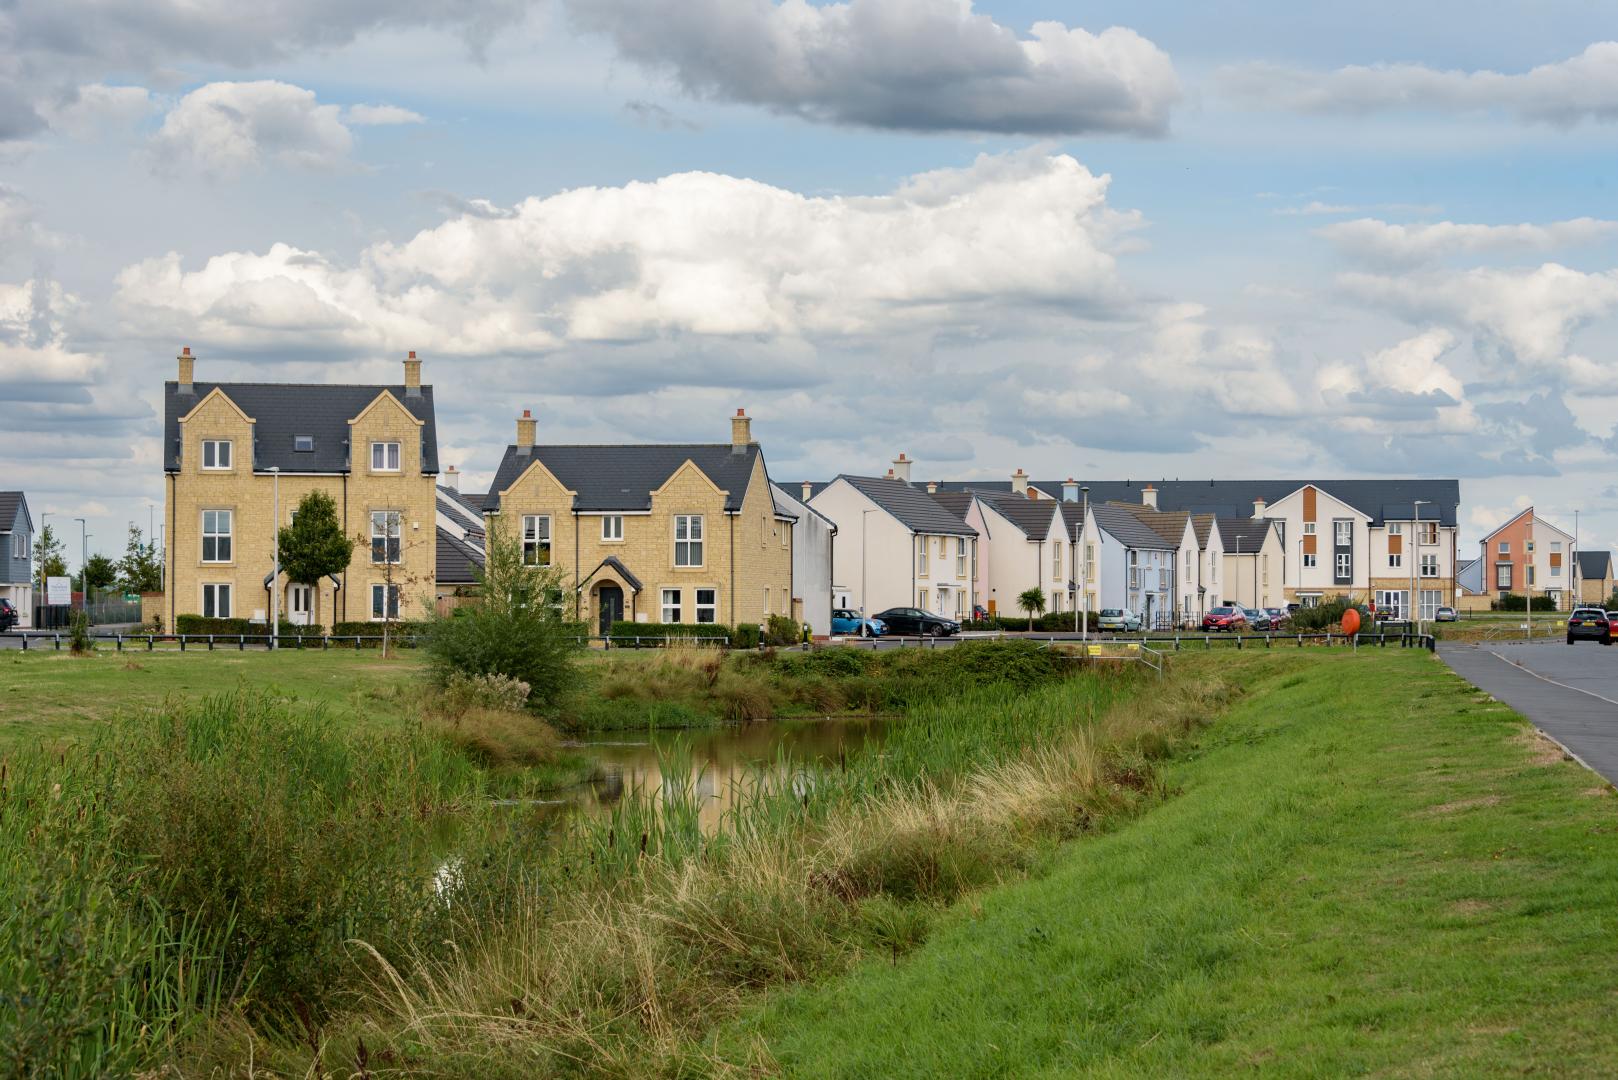 A row of houses, with a pond and green space in front of them